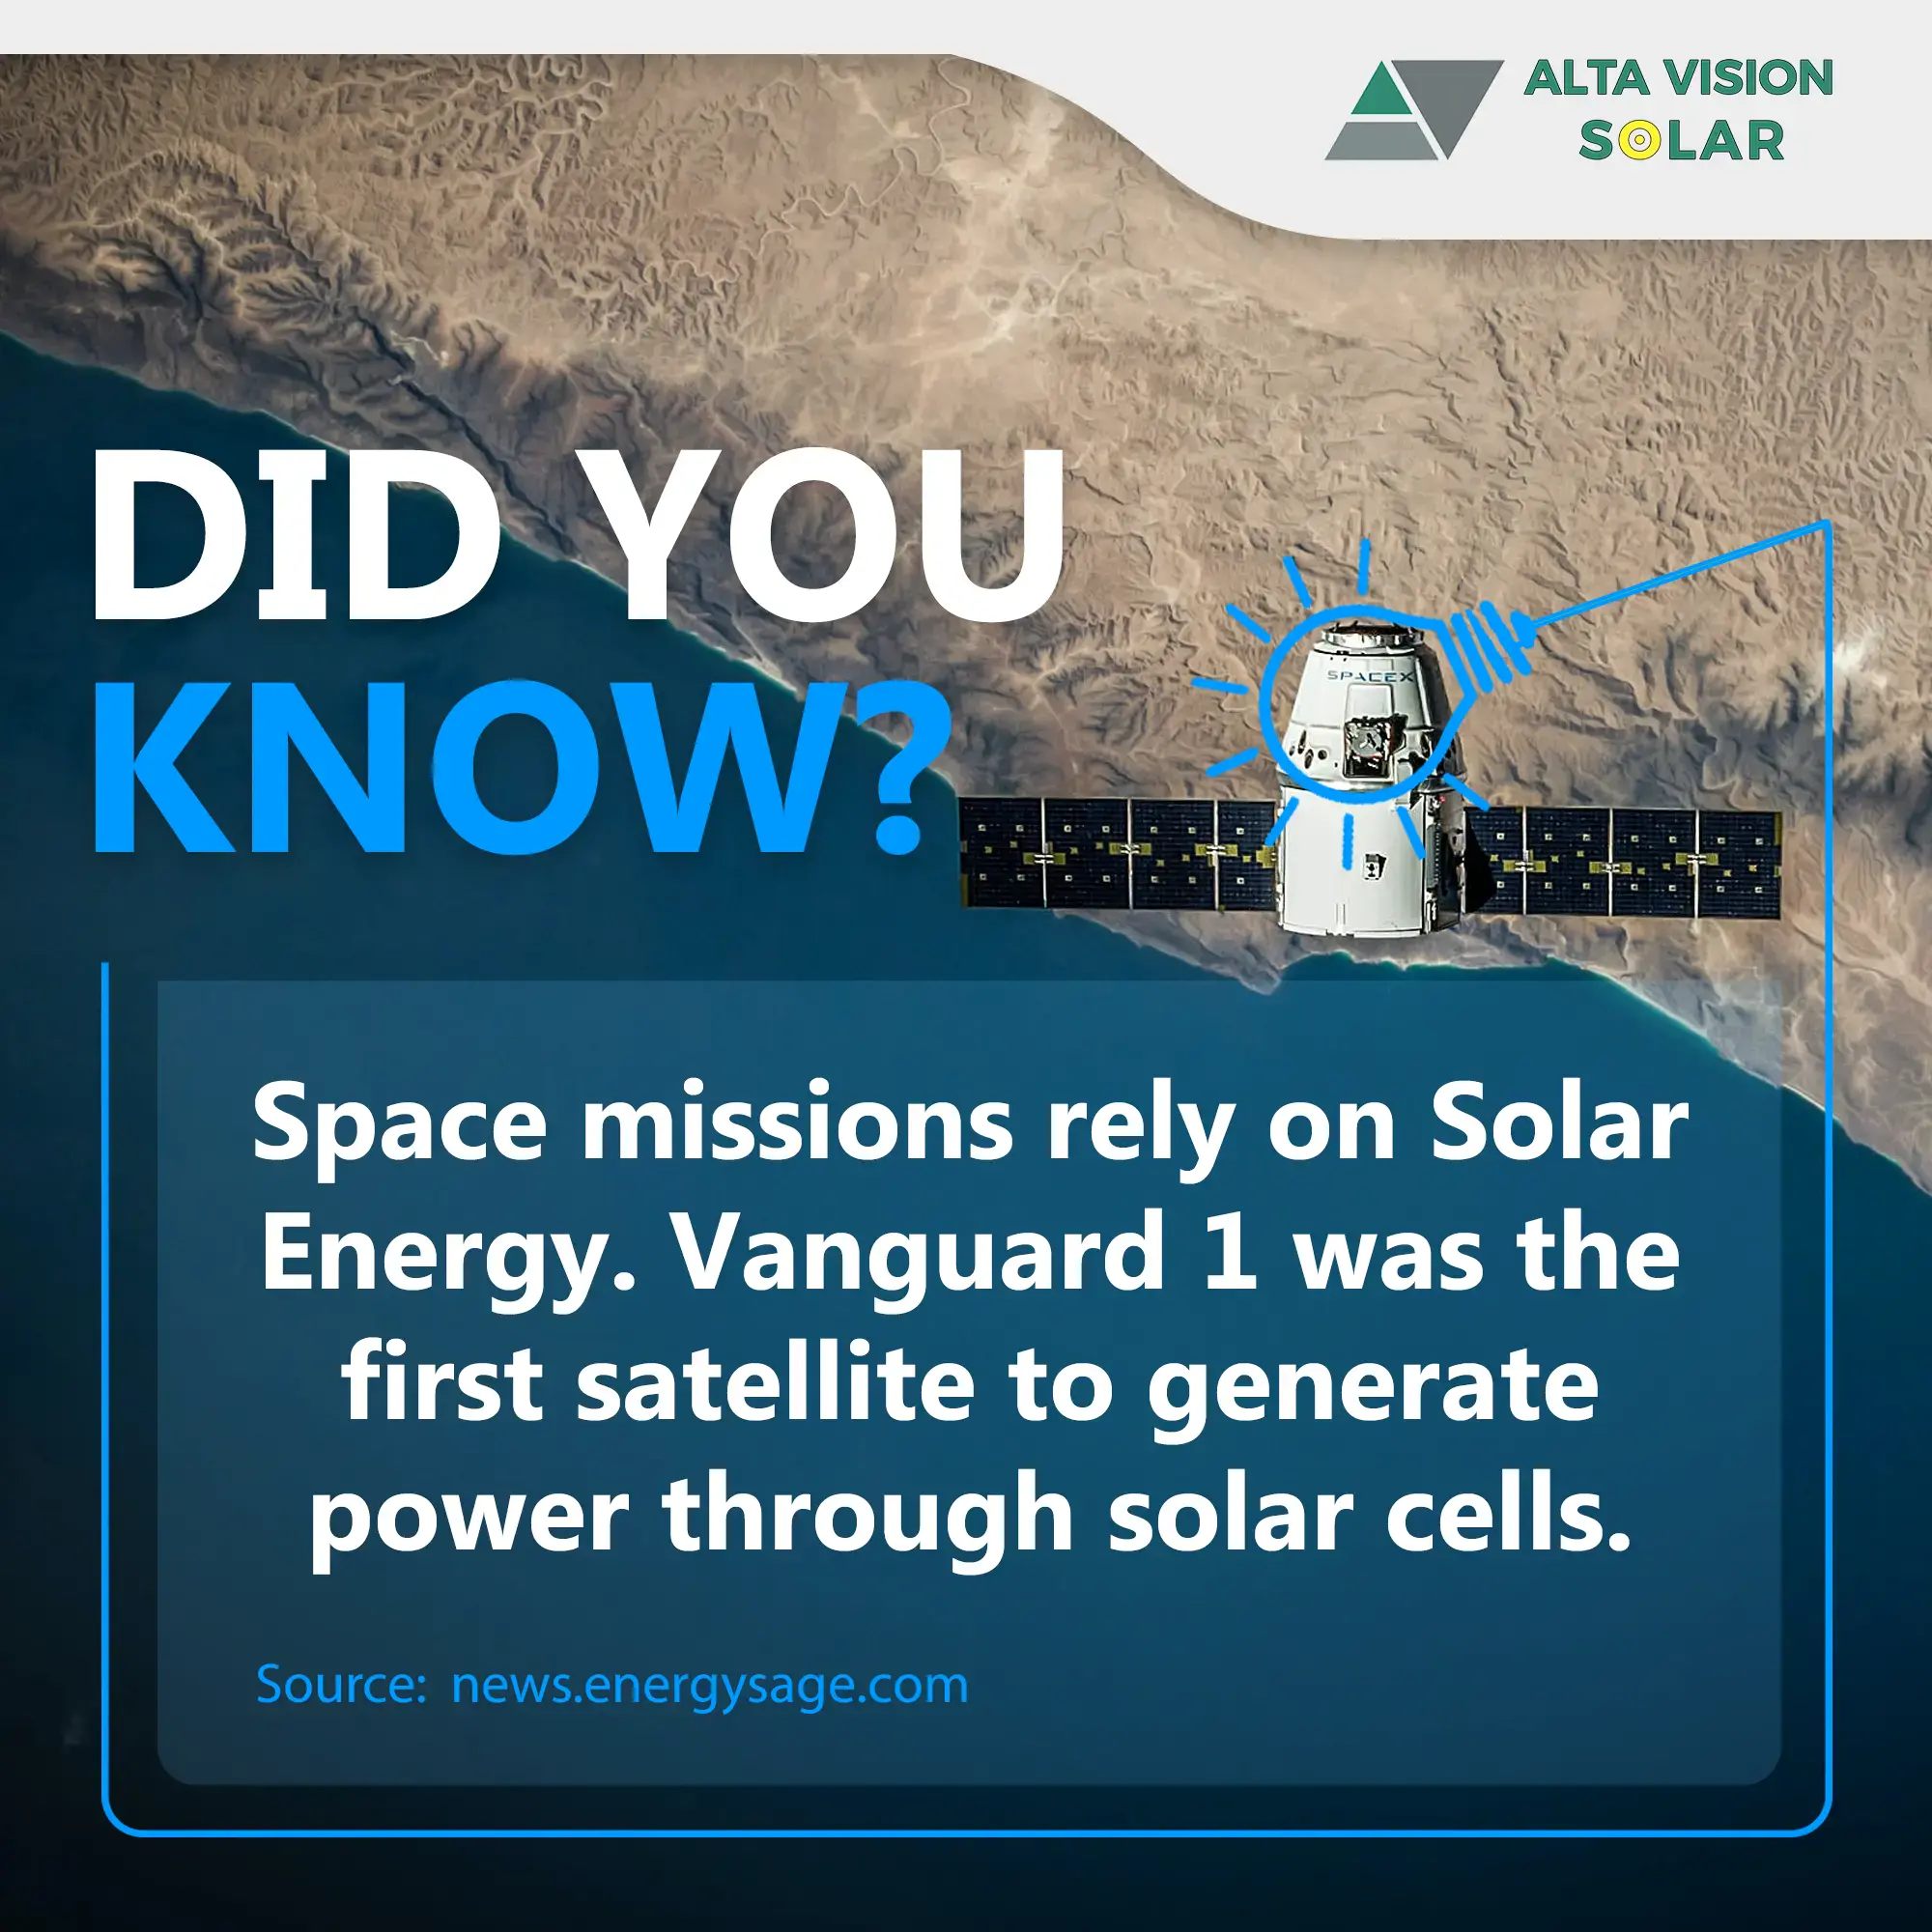 Space missions rely on Solar Energy. Vanguard 1 was the first satellite to generate power through solar cells